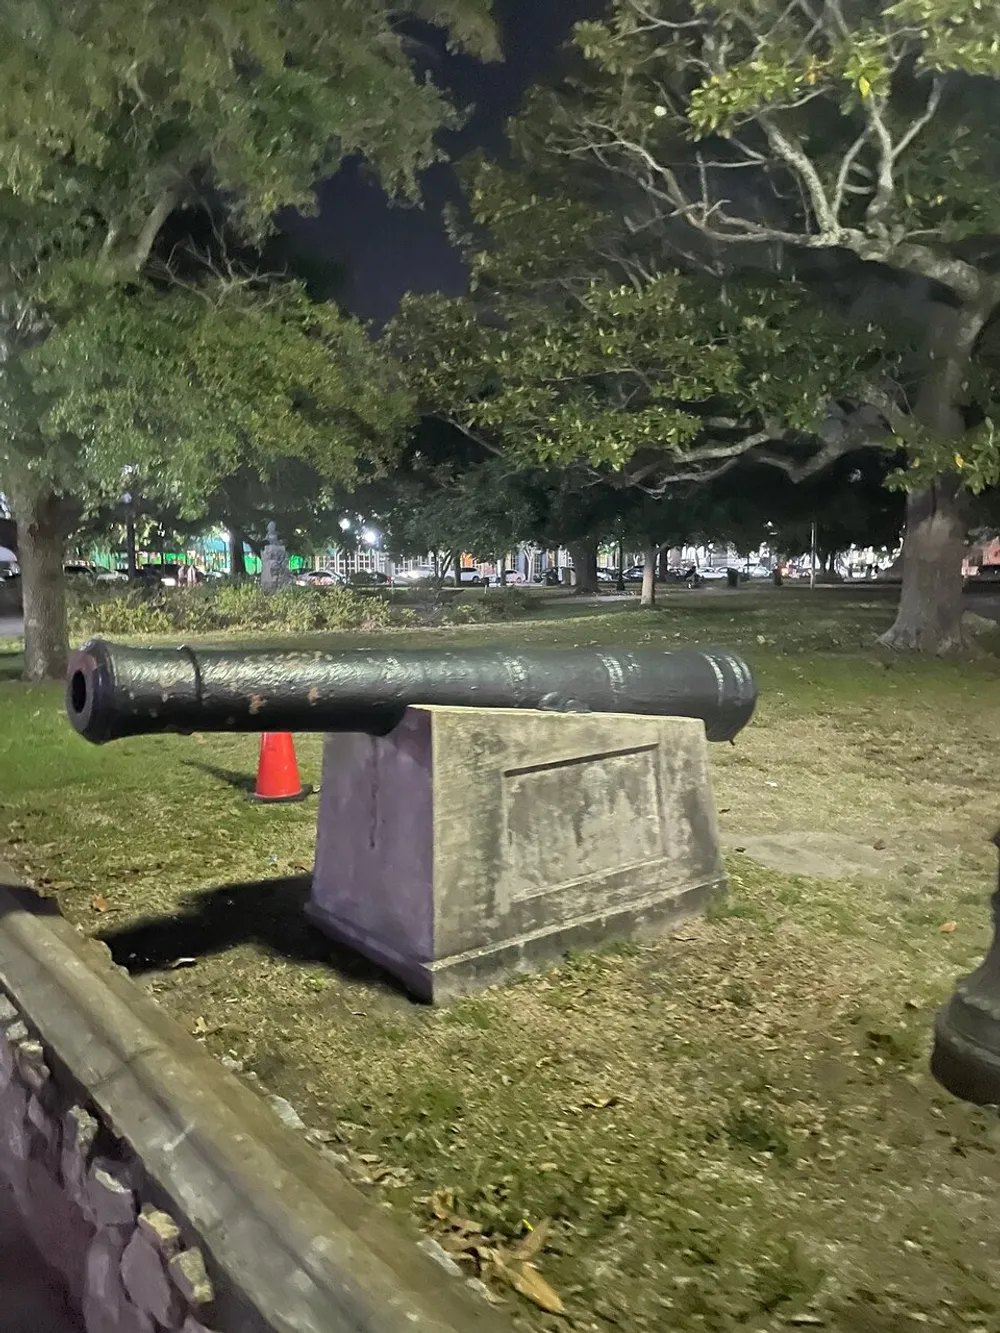 An old cannon is mounted on a stone pedestal in a park at night with trees and street lights in the background